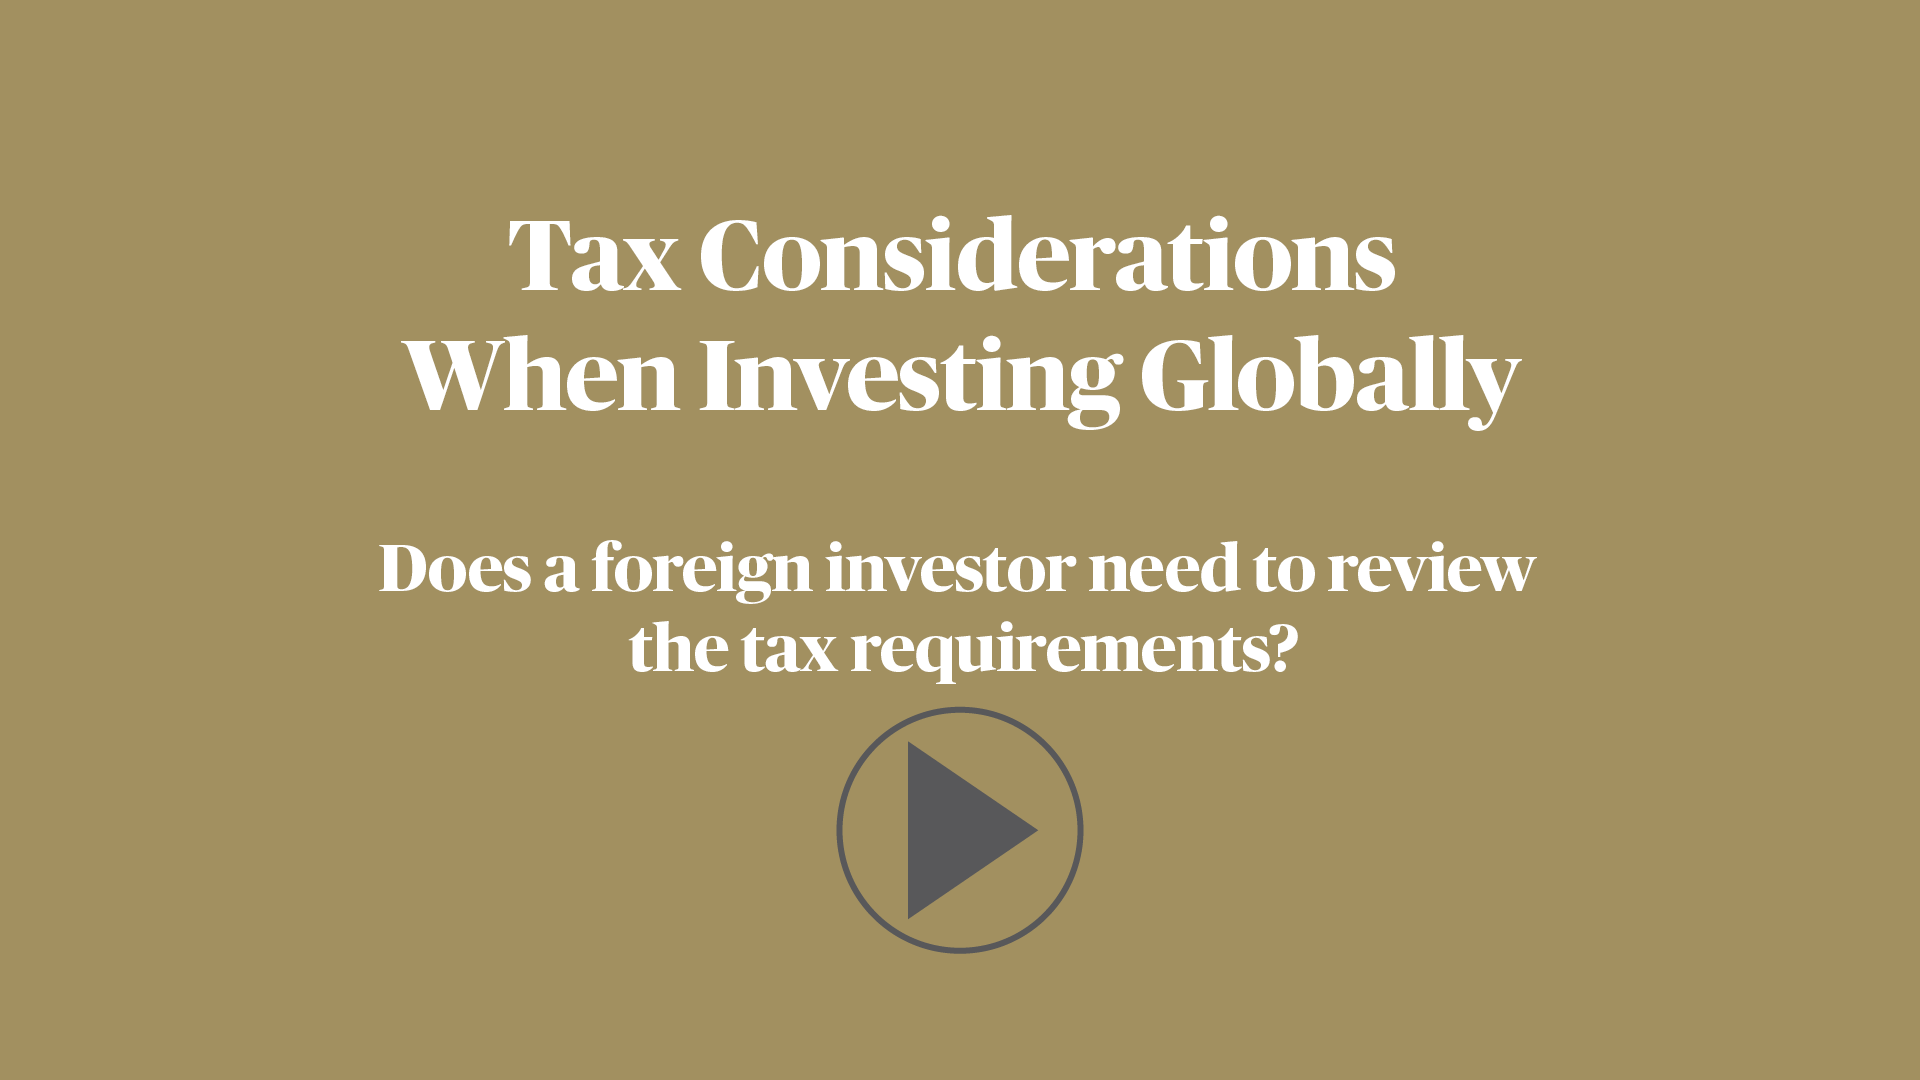 Does a foreign investor need to review the tax requirements?